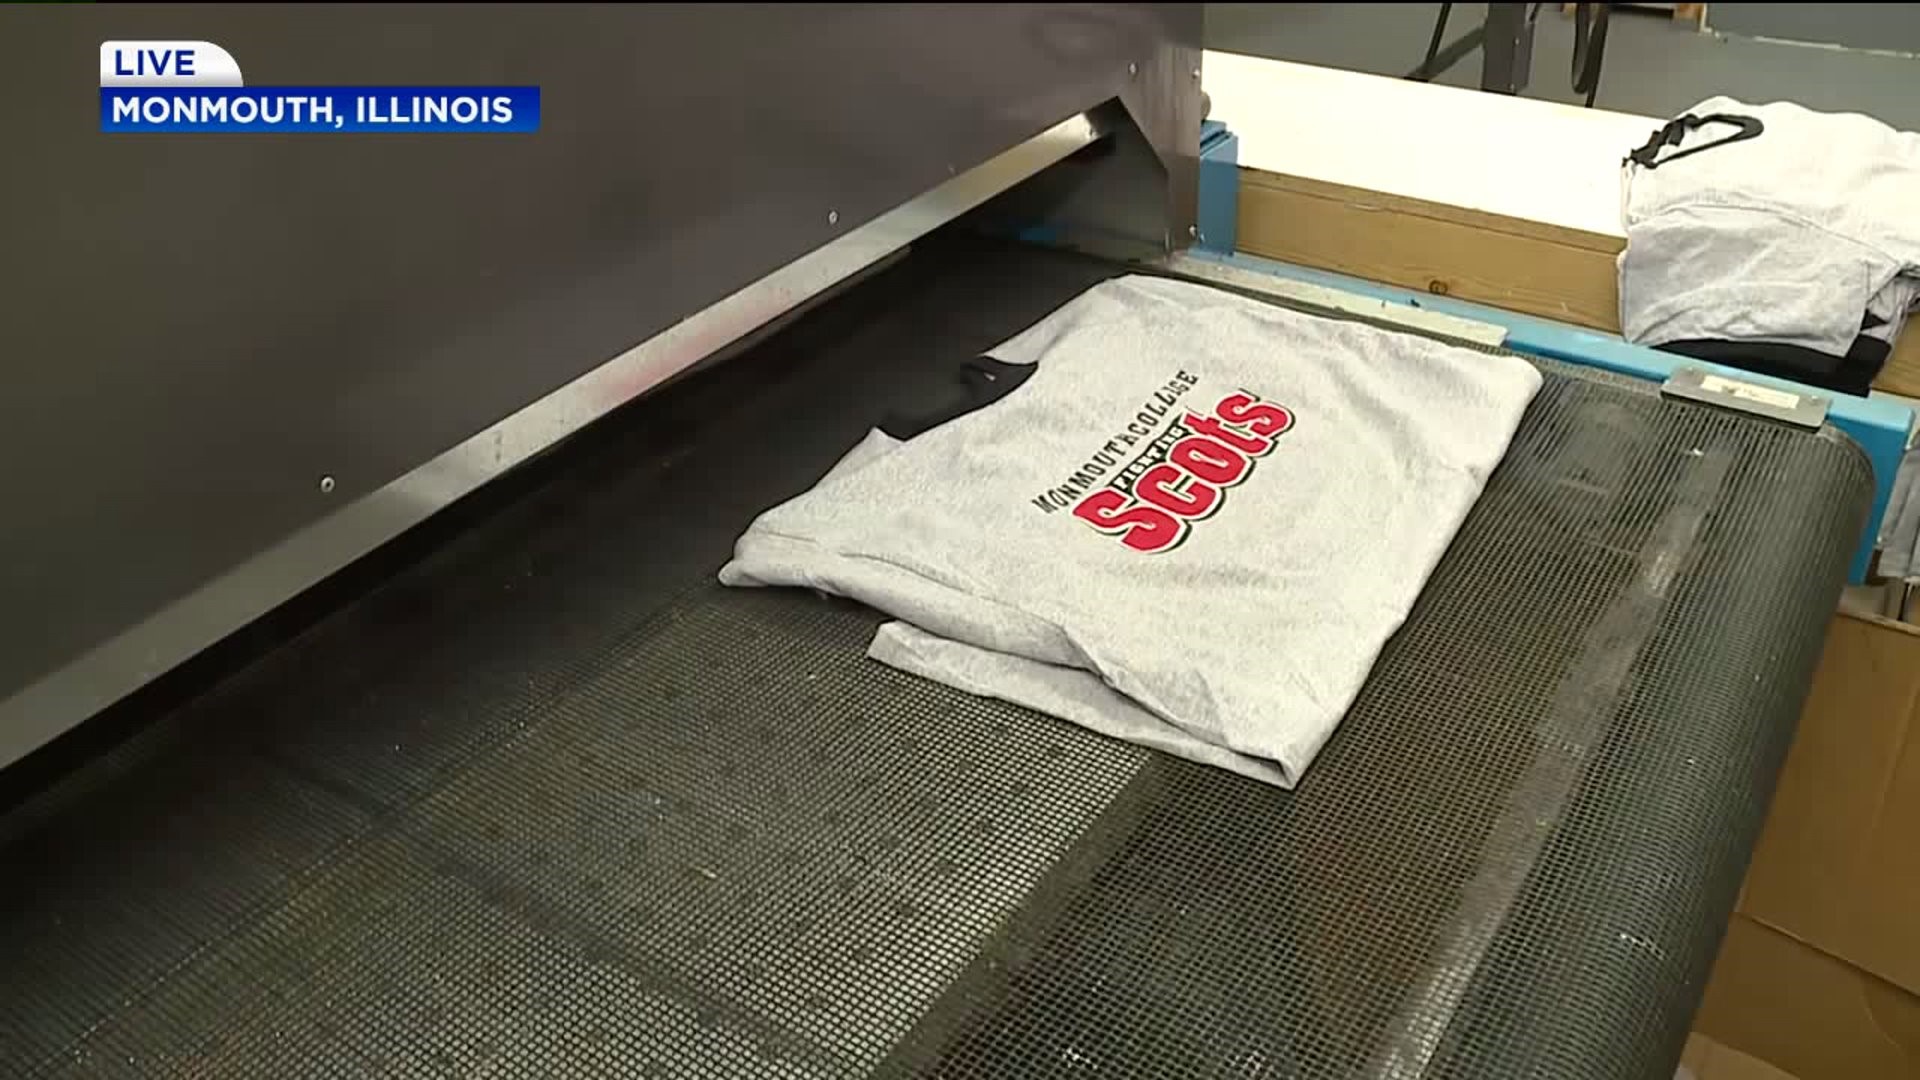 Coffee Break: Shirts hot off the press at MC Sports in Monmouth